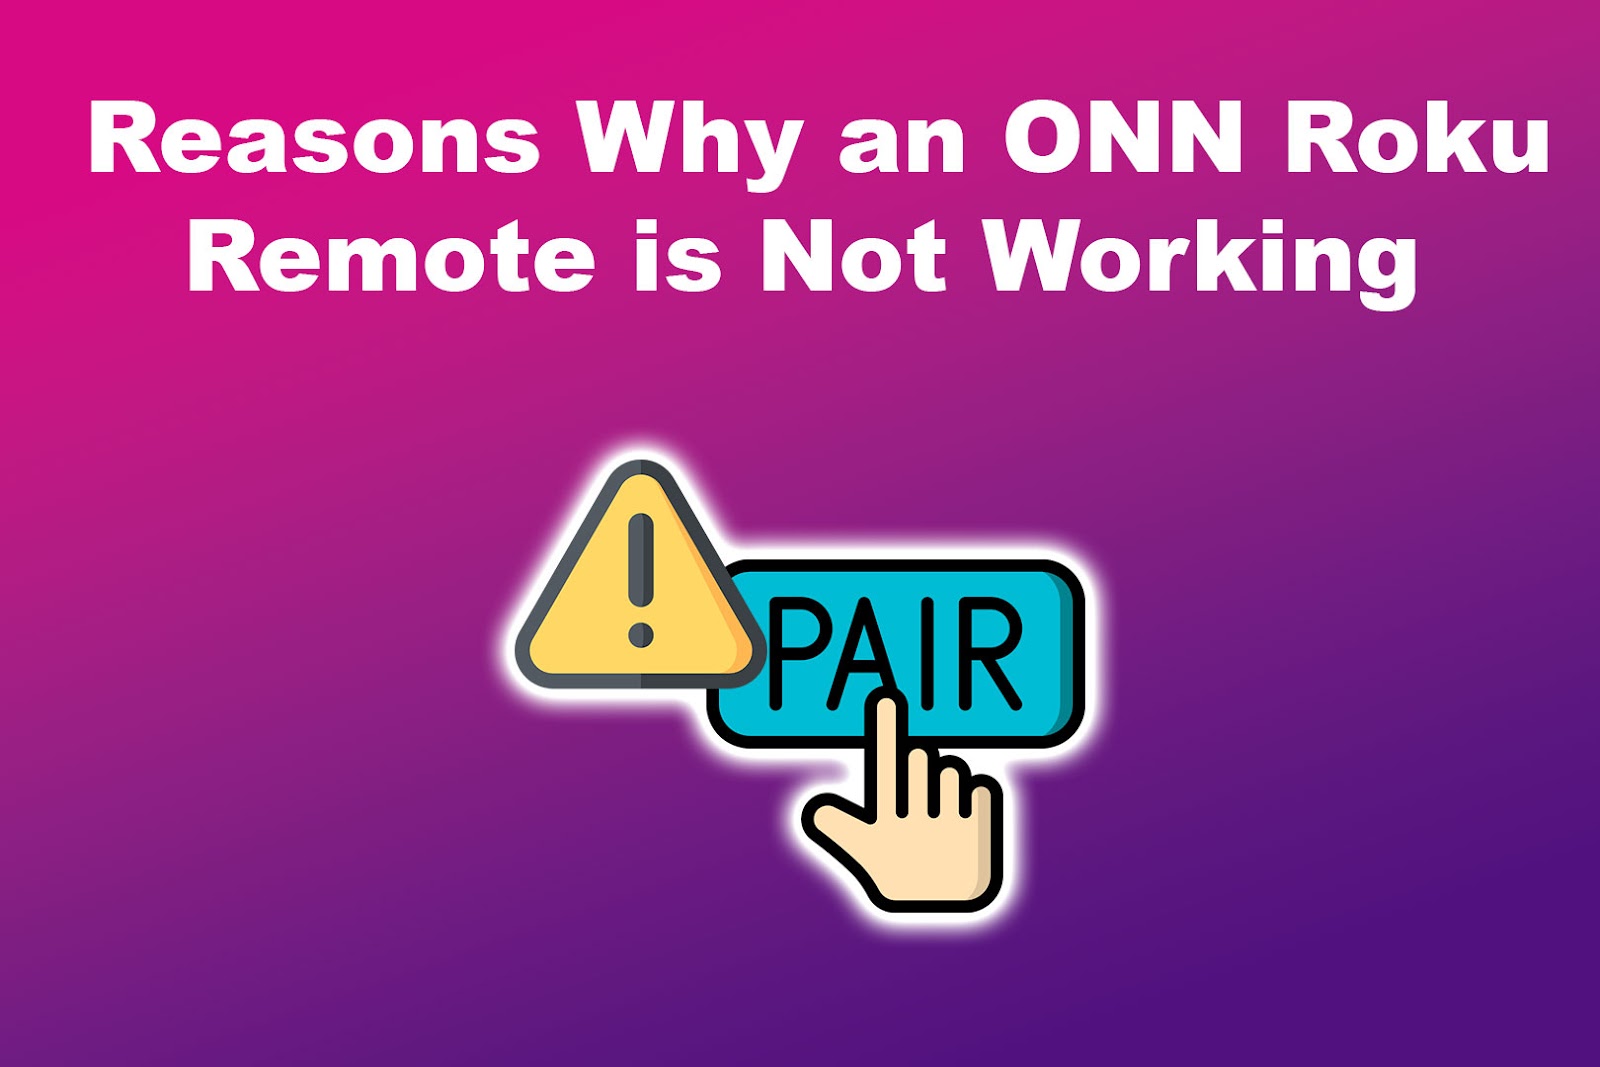 Reasons Why an Onn Roku Remote is Not Working